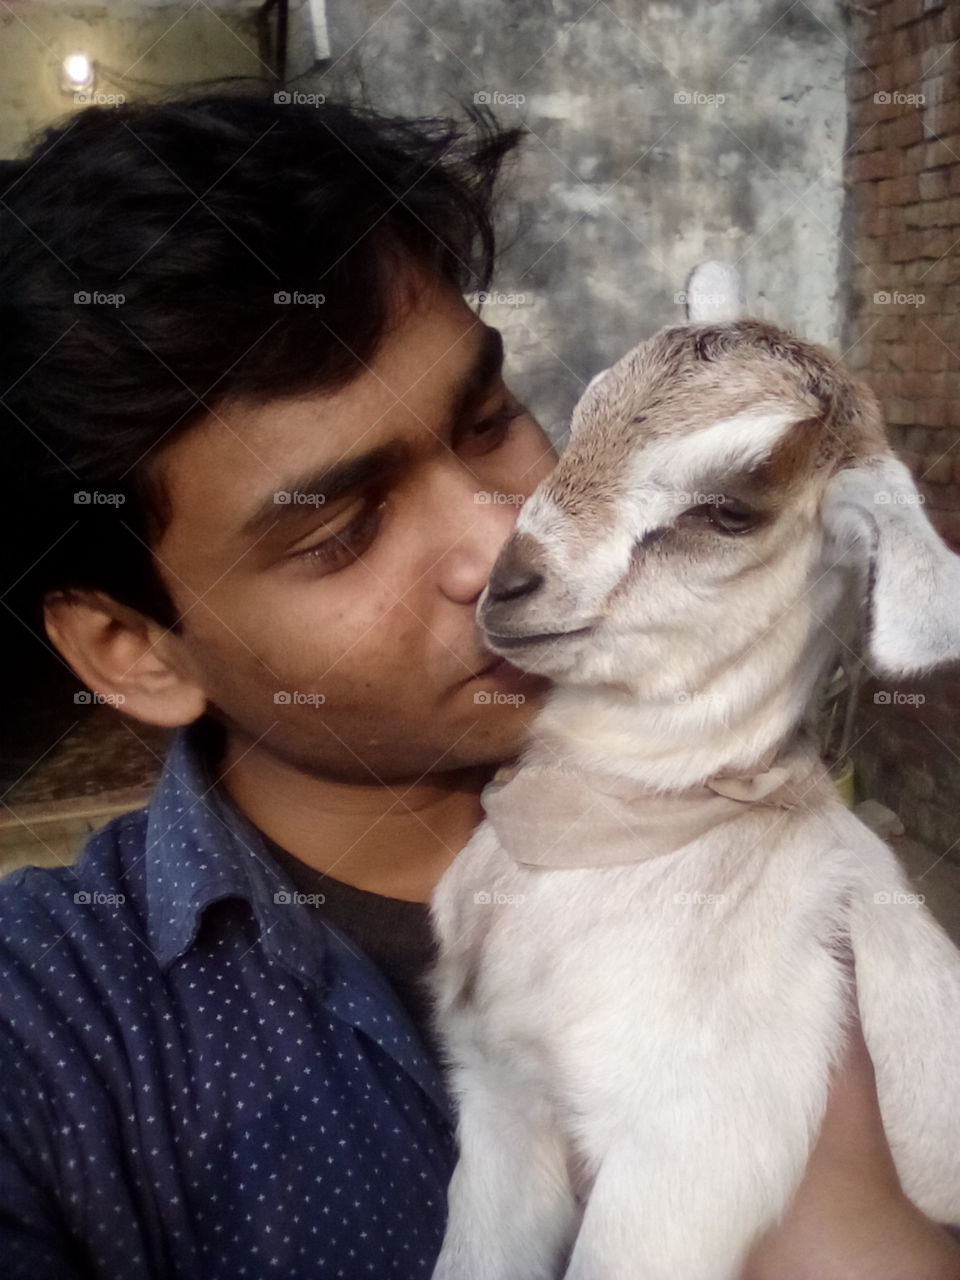 With Baby goat